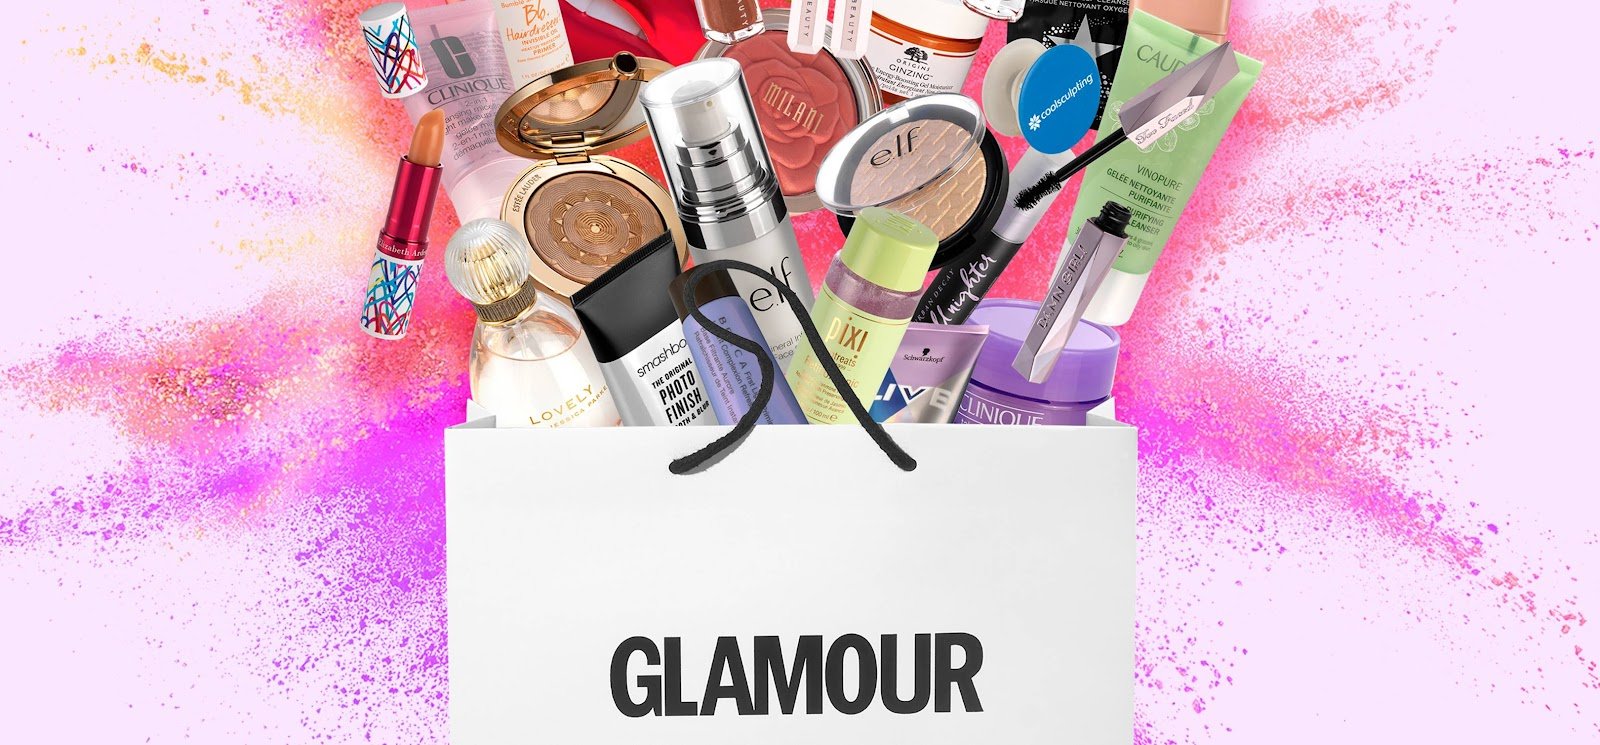 Glamour – Where you can explore your beauty